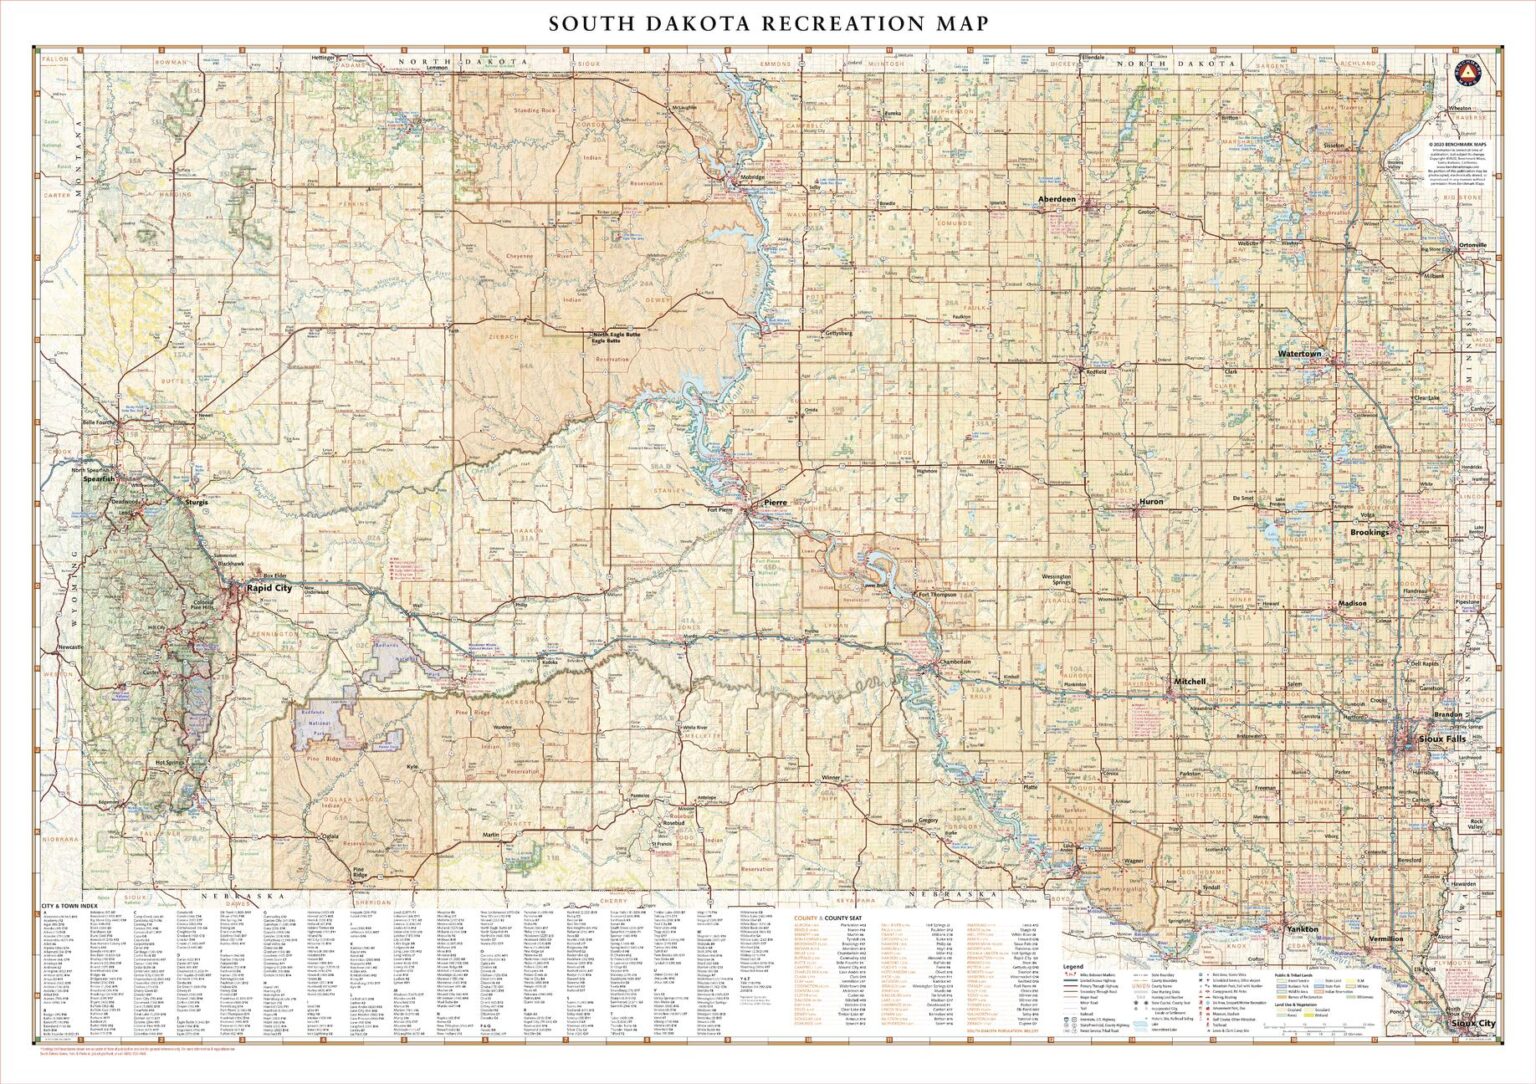 South Dakota Recreation Wall Map by Benchmark Maps - The Map Shop